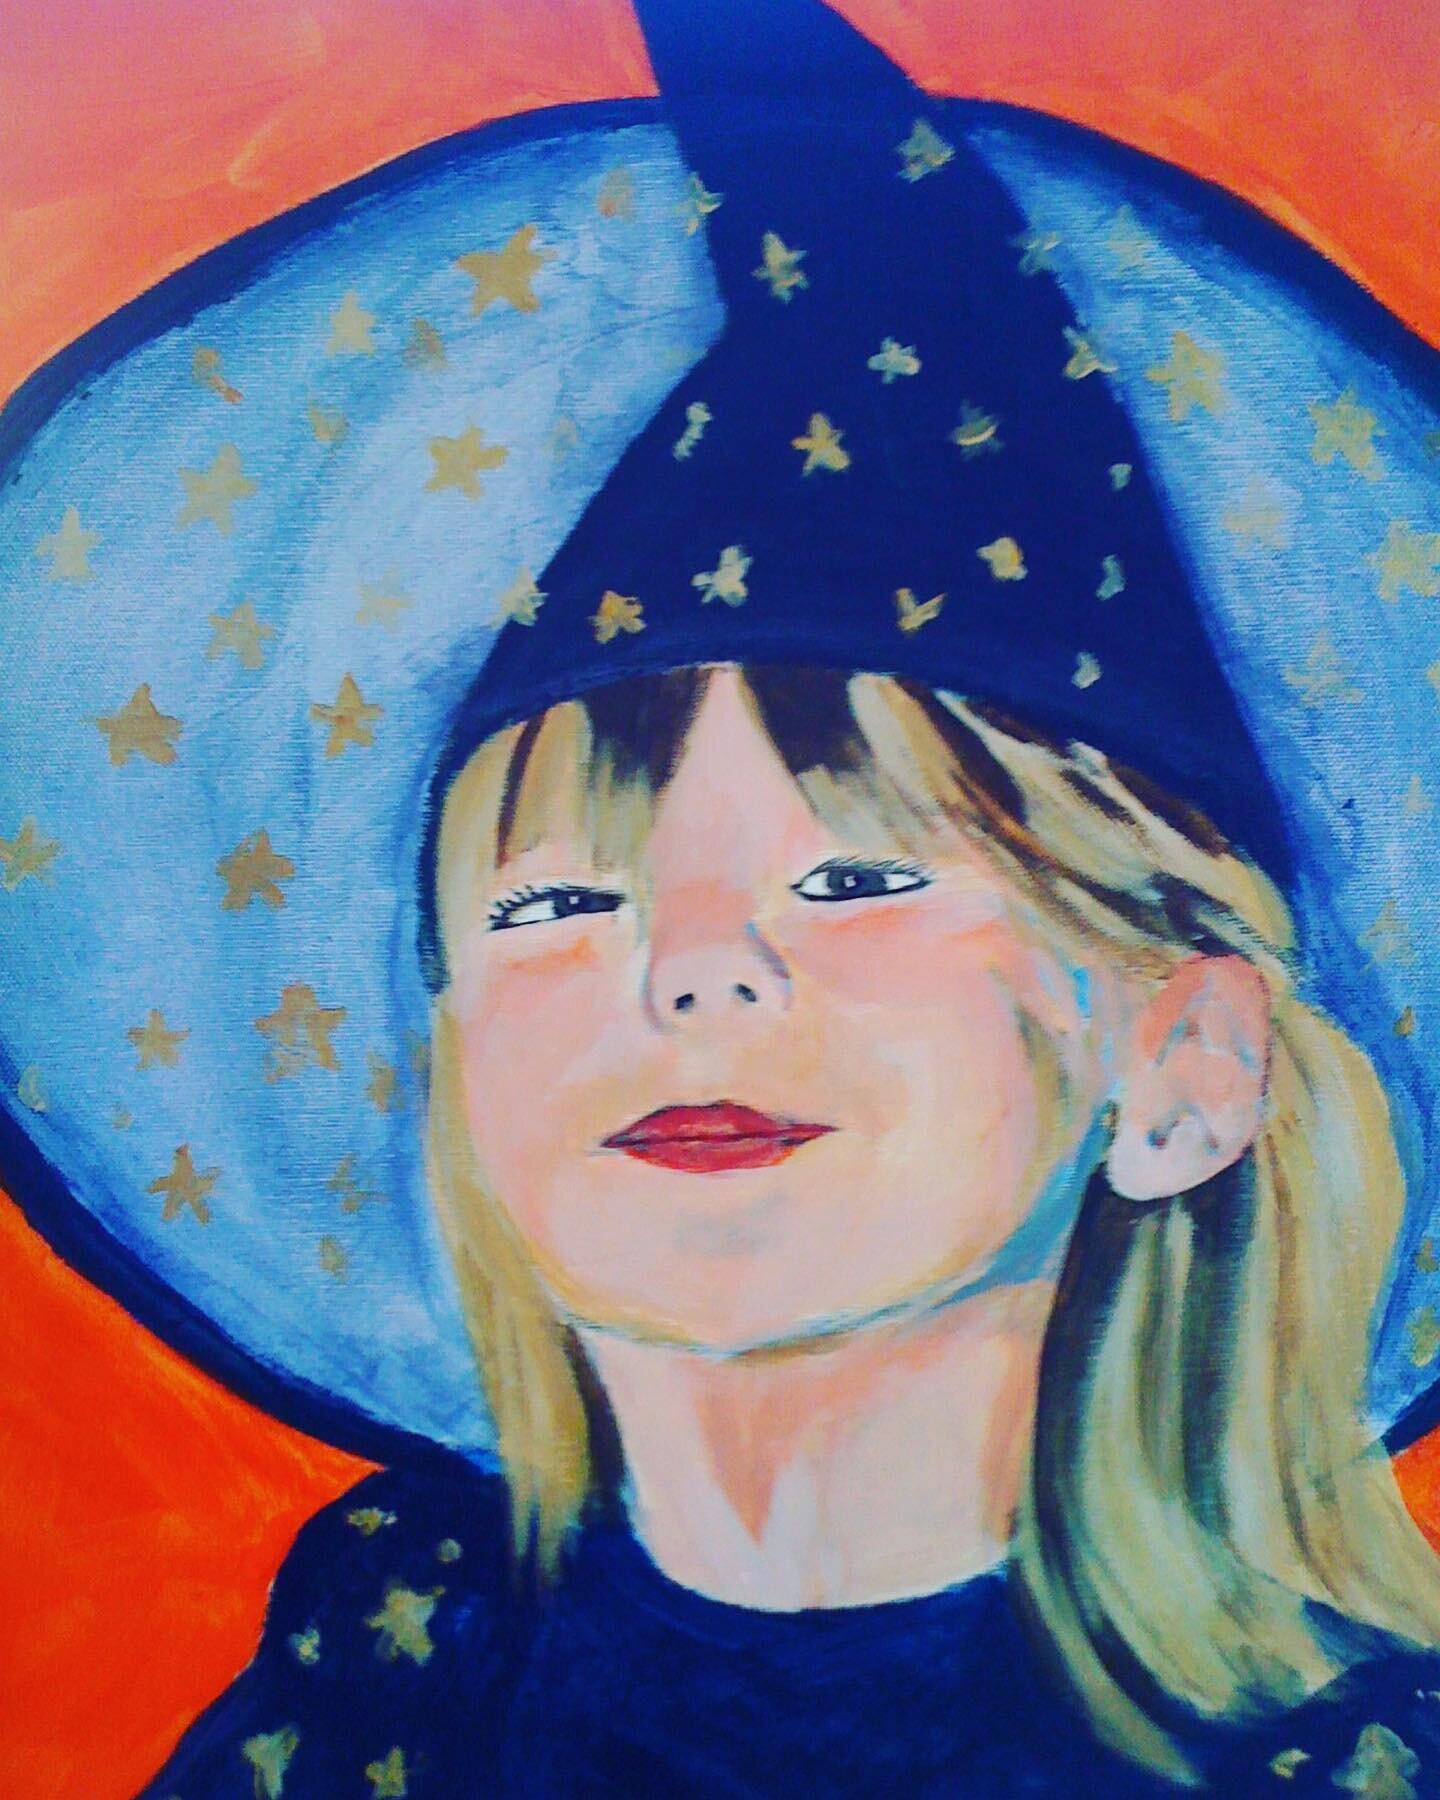 I had SO much fun painting this portrait for a friend. Her look is so precious. Happy Halloween 🎃#witches #magic #halloween #acrylicpainting #wonder #spellsandpotions #allthatglitters